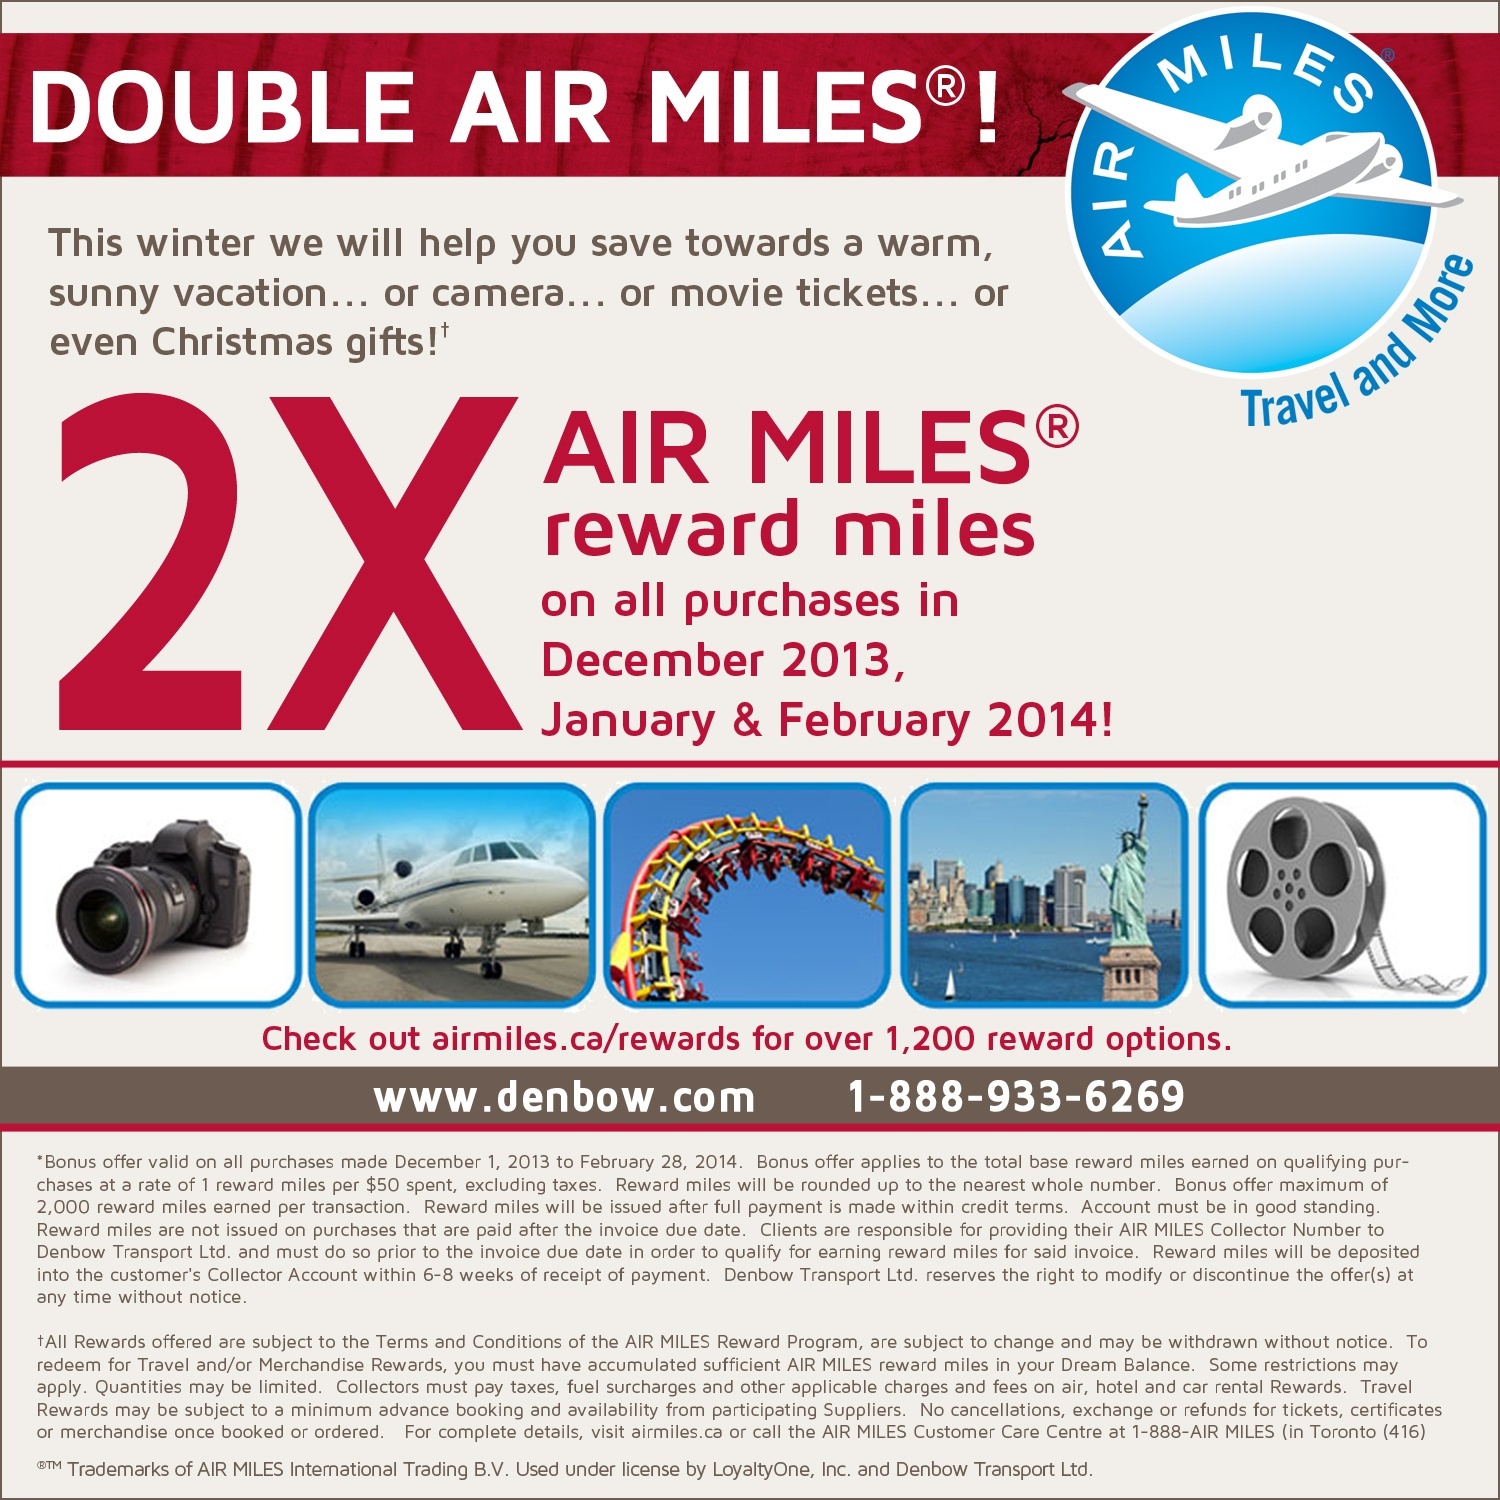 Winter Air Miles promotion!